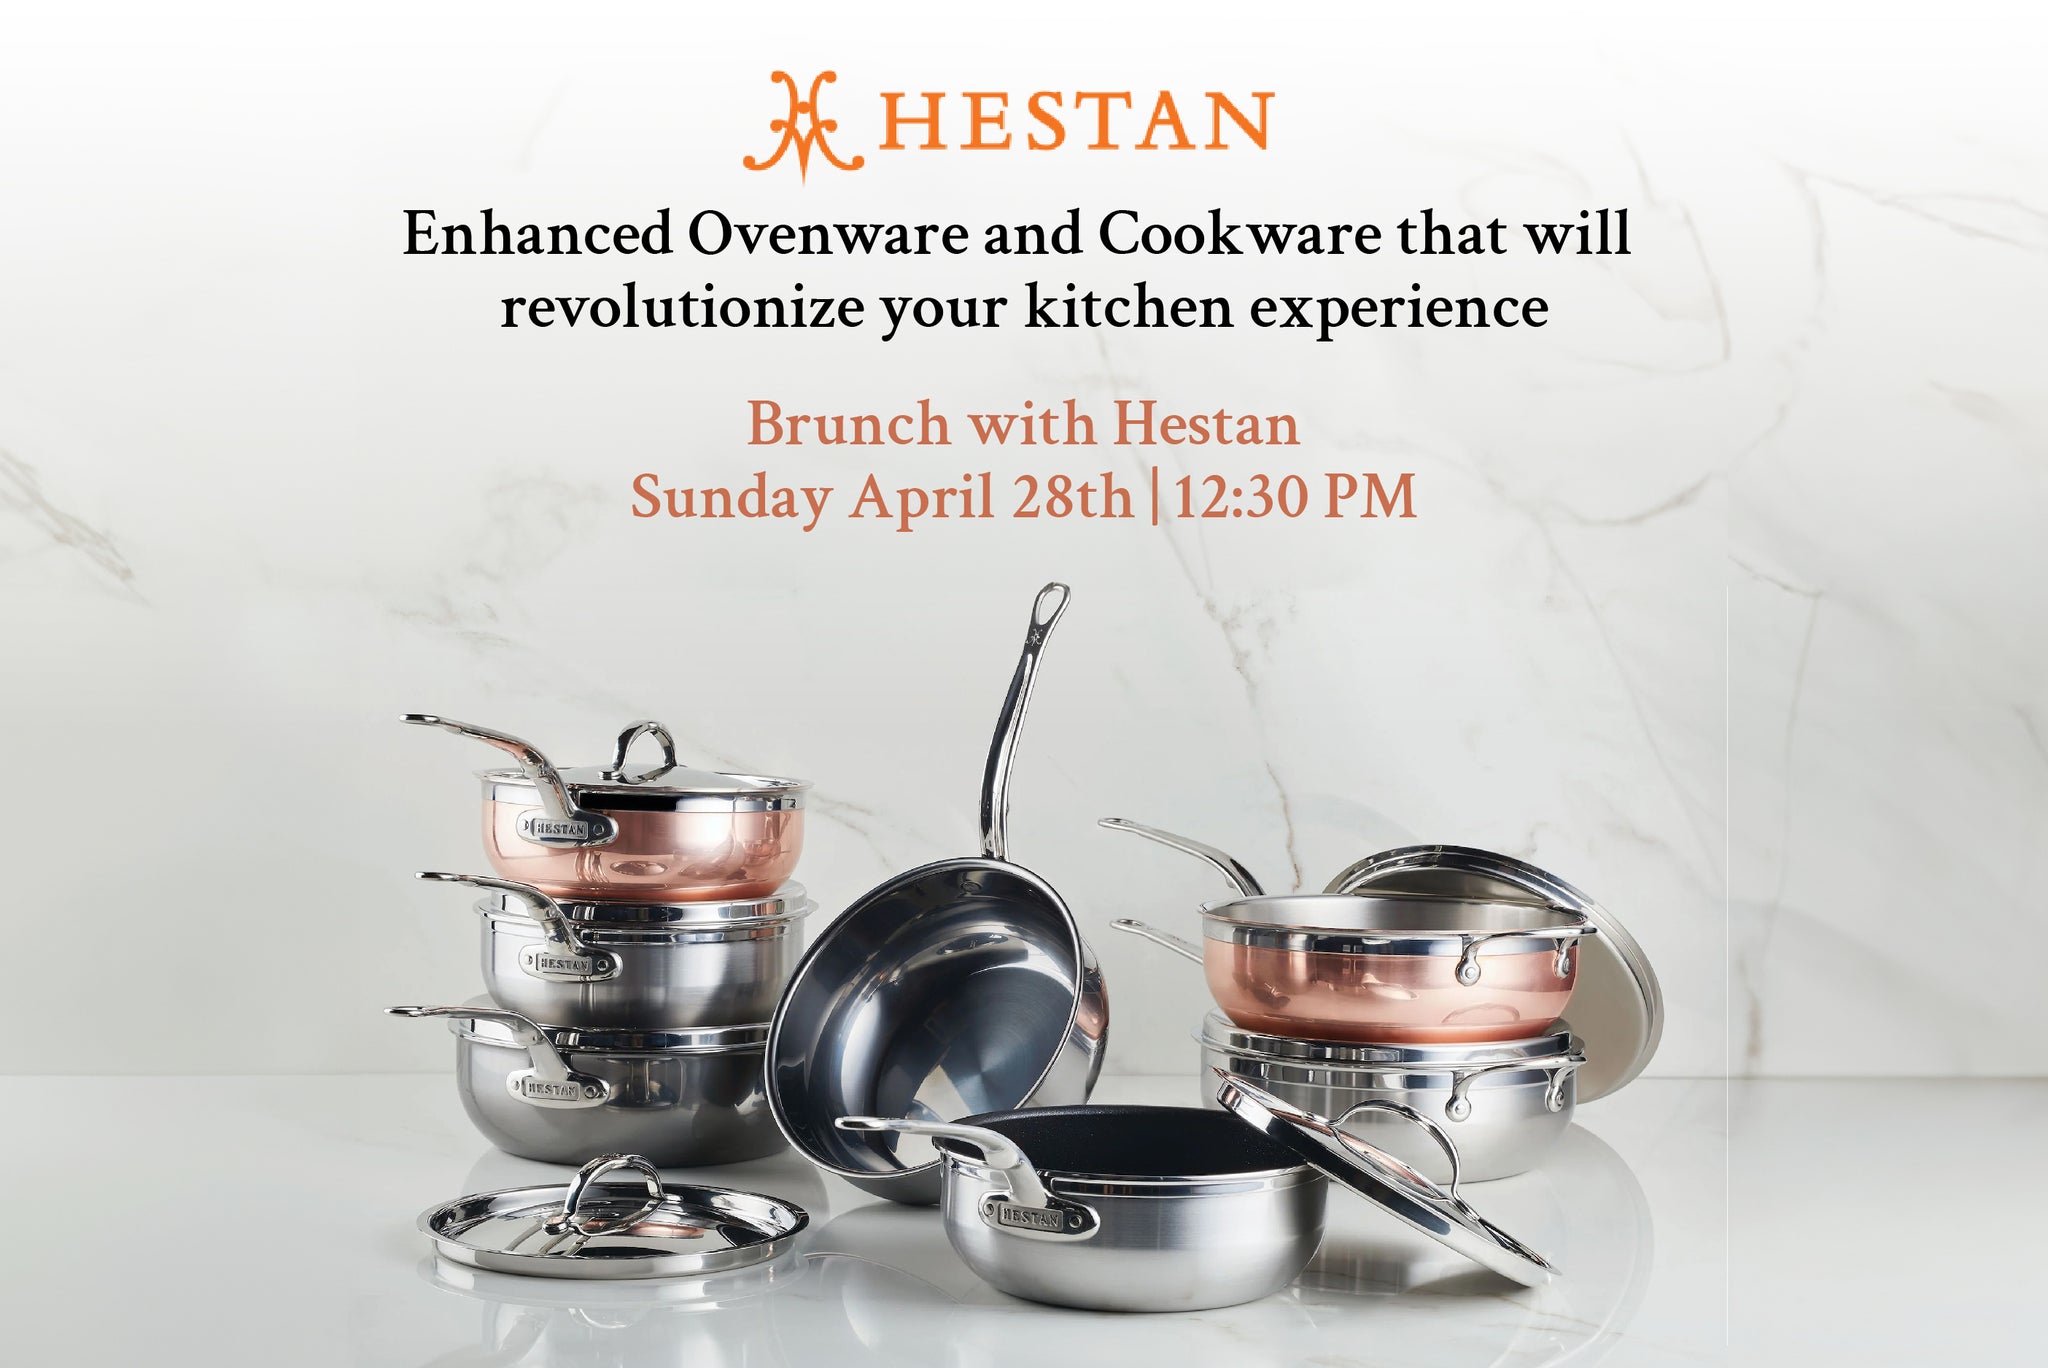 Brunch with Hestan Sunday April 28th: 12:30 PM